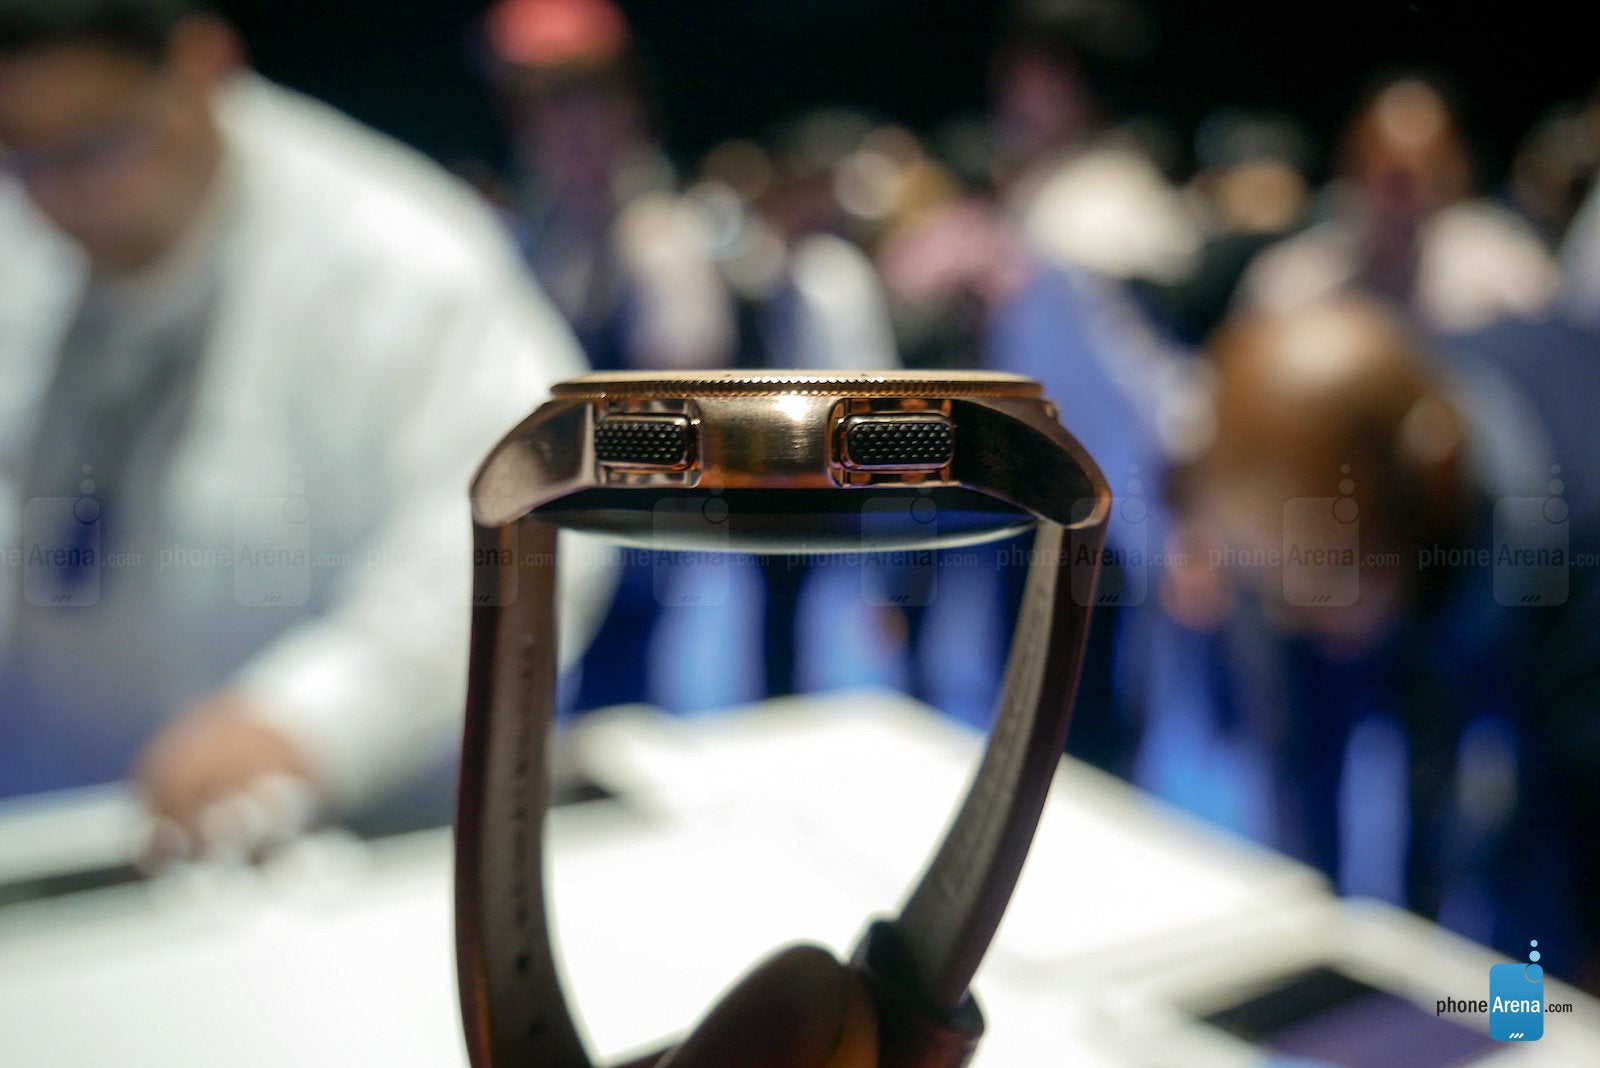 Samsung Galaxy Watch hands-on: The new standard in smartwatches?